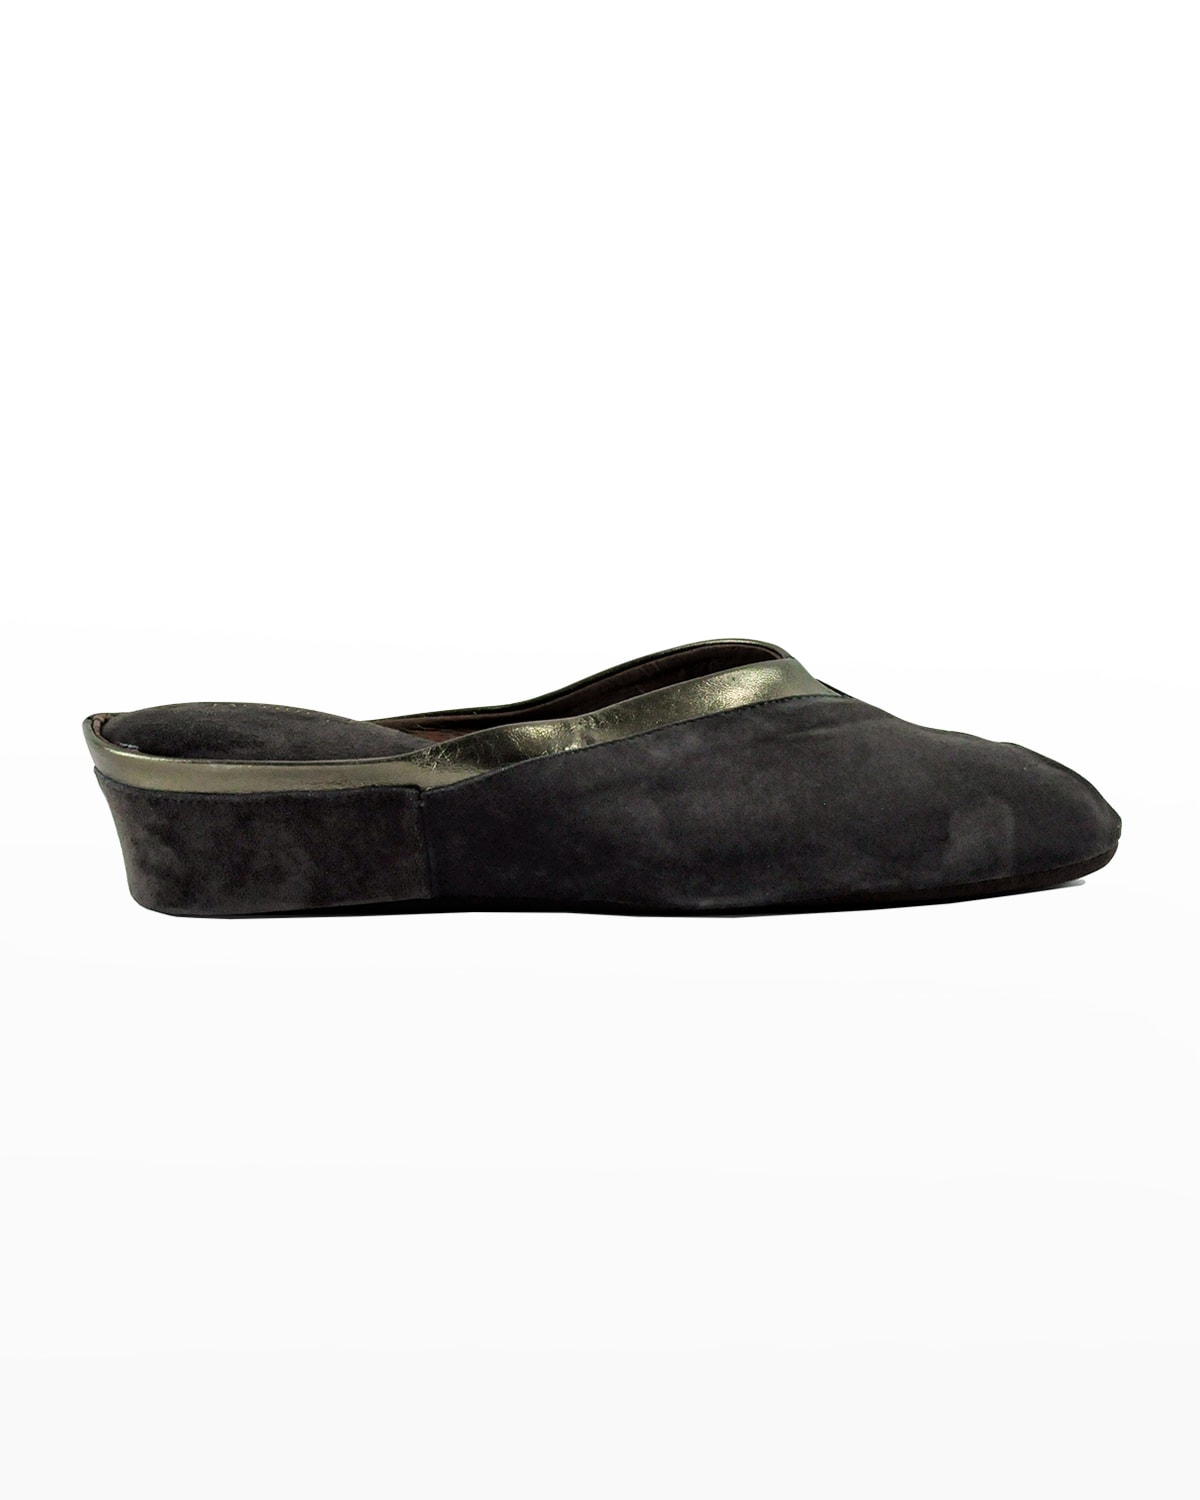 Jacques Levine Suede Wedge Mule Slippers